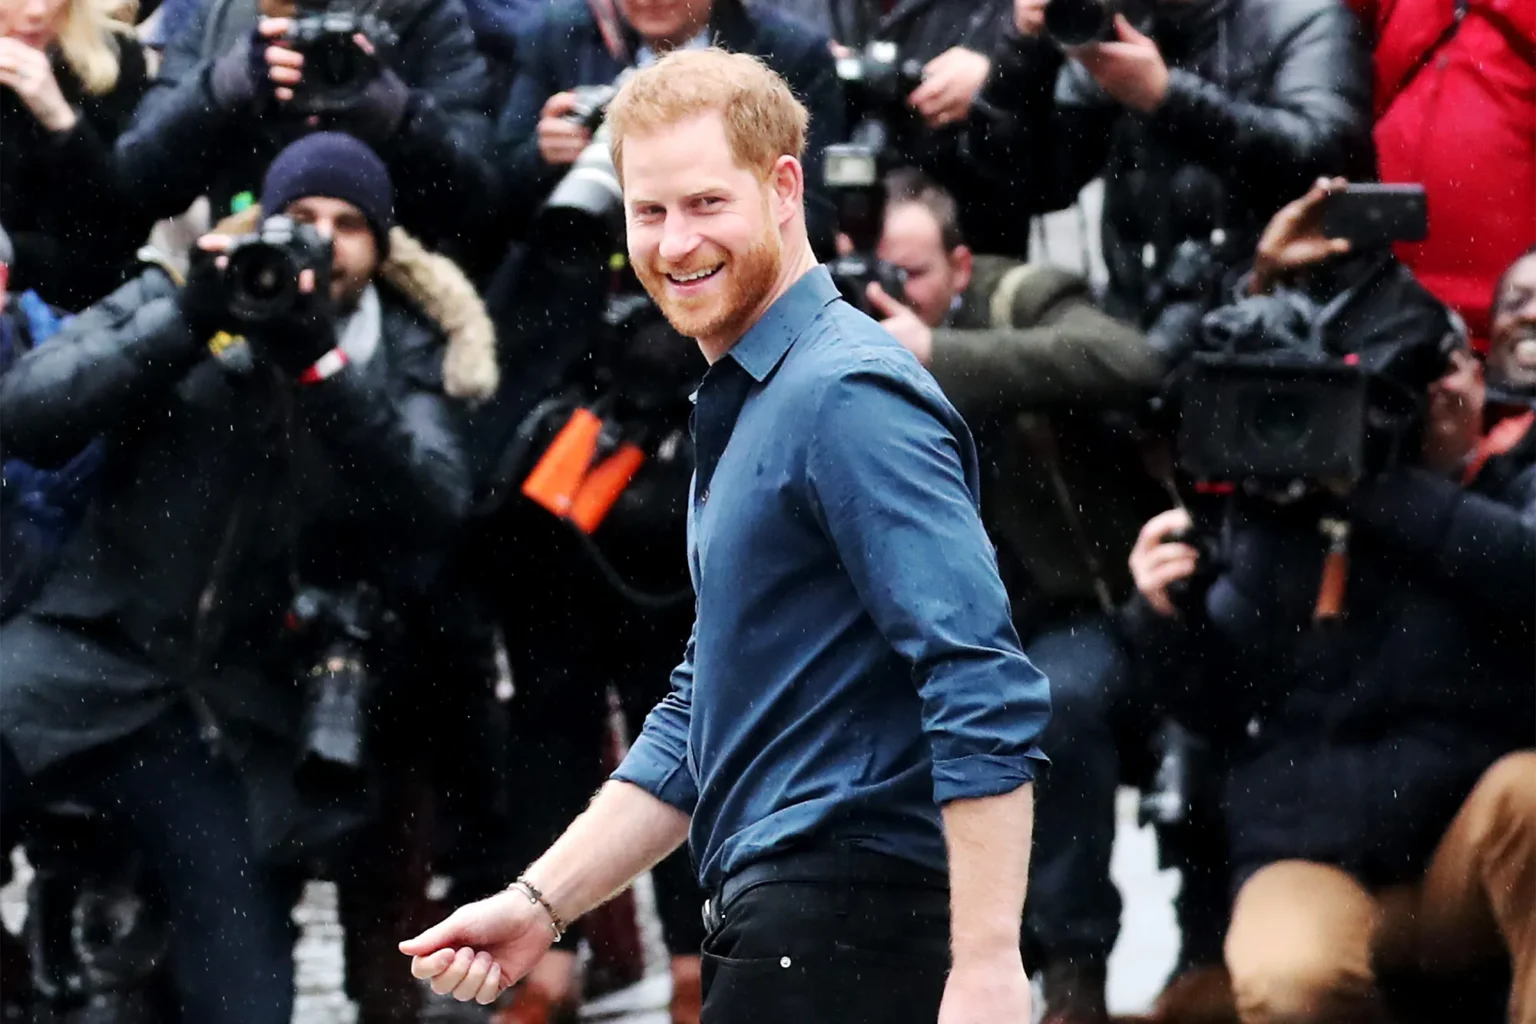 prince-harry-got-support-from-this-royal-member-amid-his-rift-with-royals